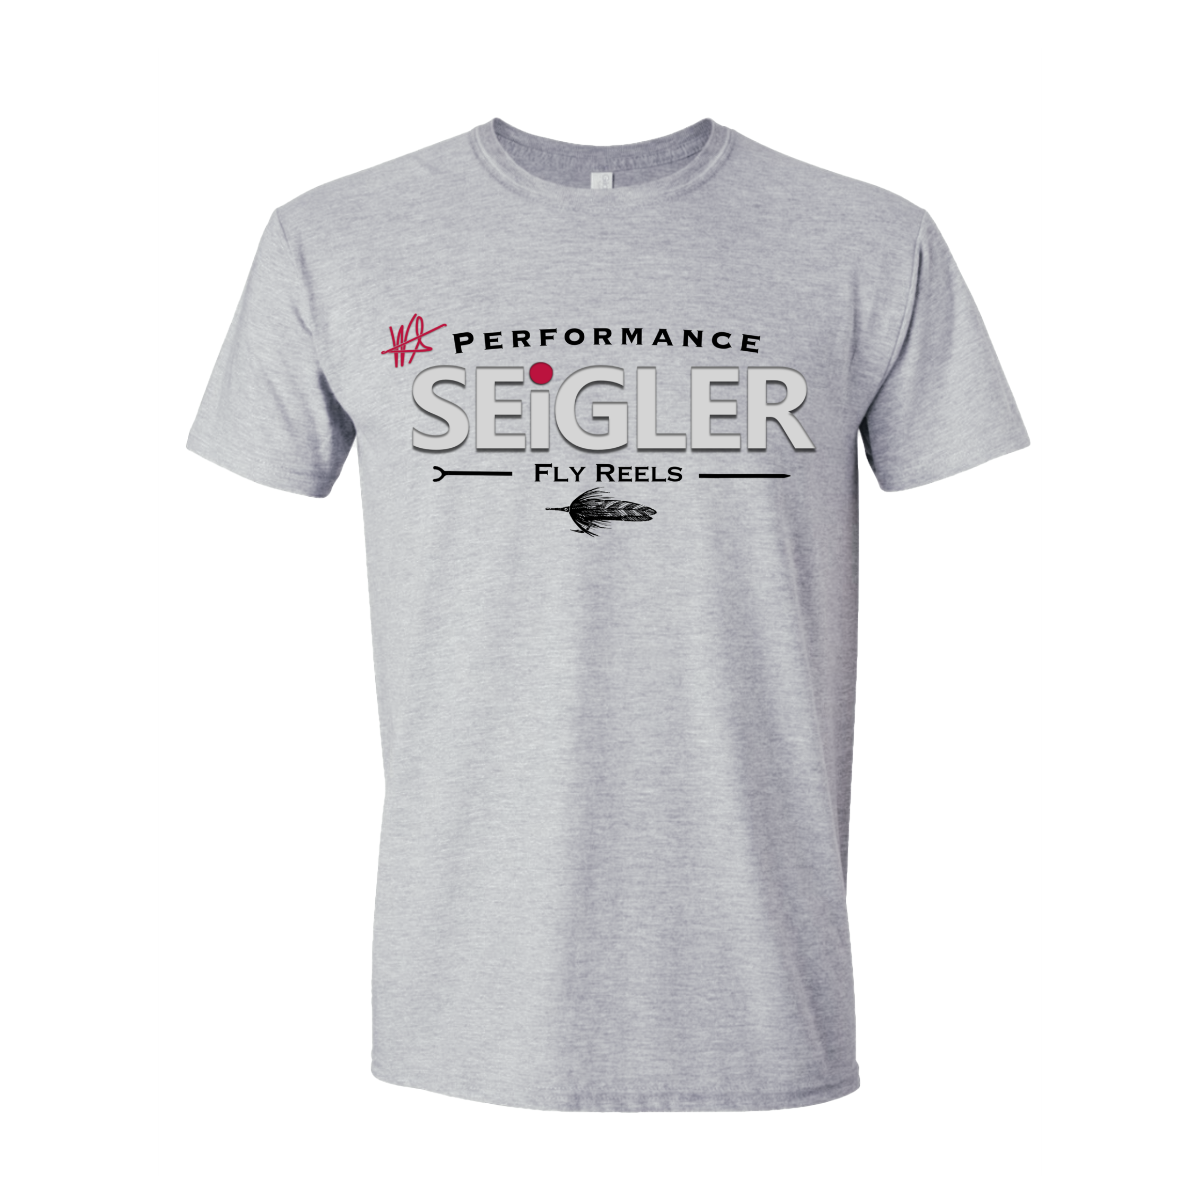 SEiGLER Performance Fly fishing Reels, T Shirt, Handcrafted fly fishing reels. Made in Virginia. Fishing Shirt, cotton comfy T-shirt 